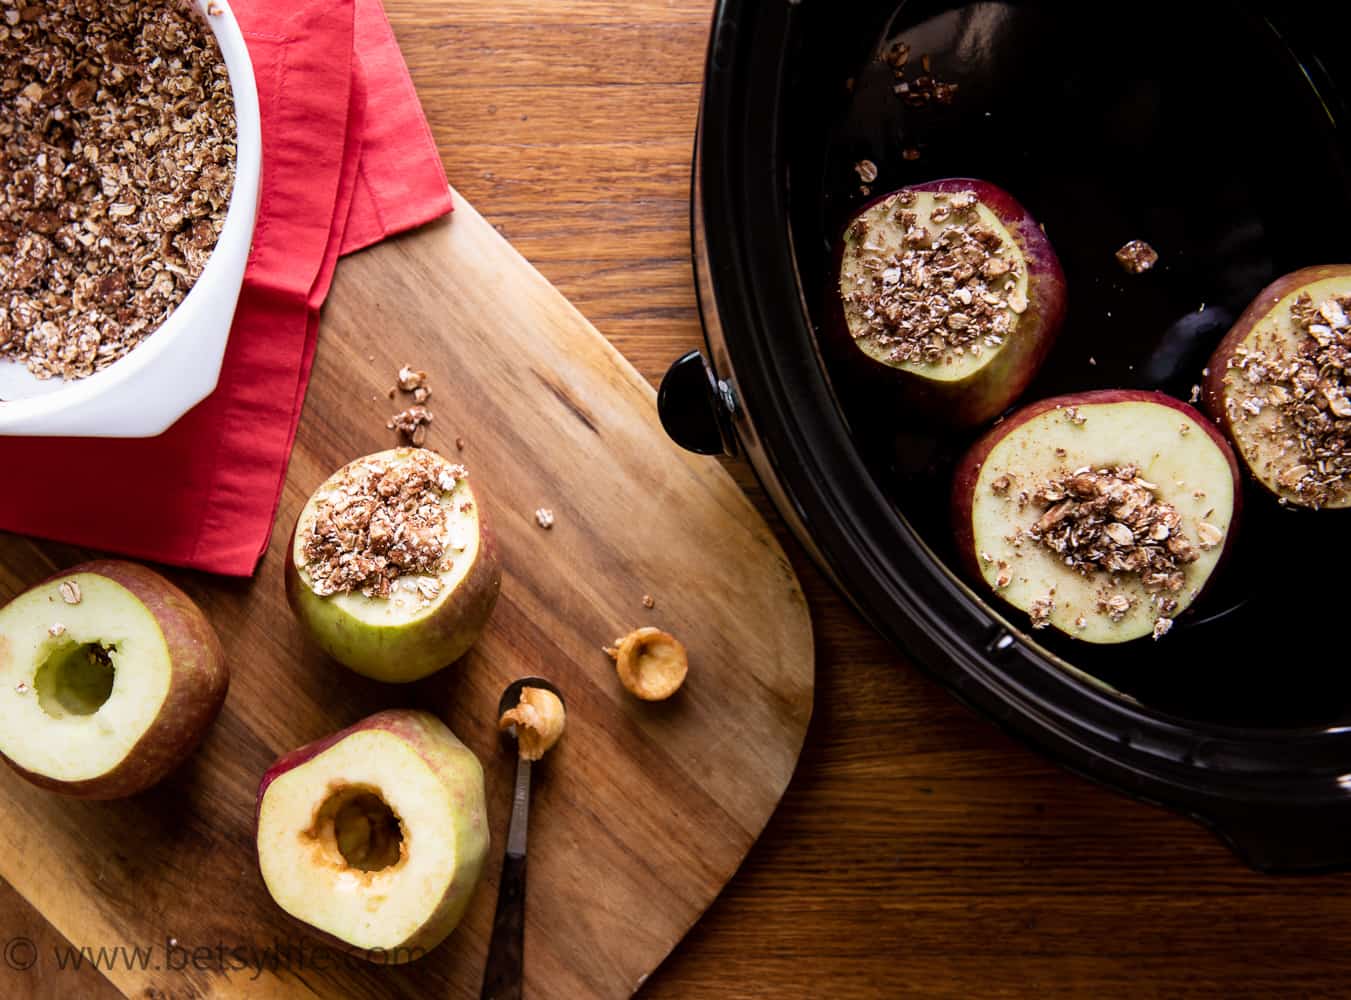 Baked apple preparation. Bowl of oat mixture, cored apples, several stuffed with mixture on a cutting board next to a crock pot